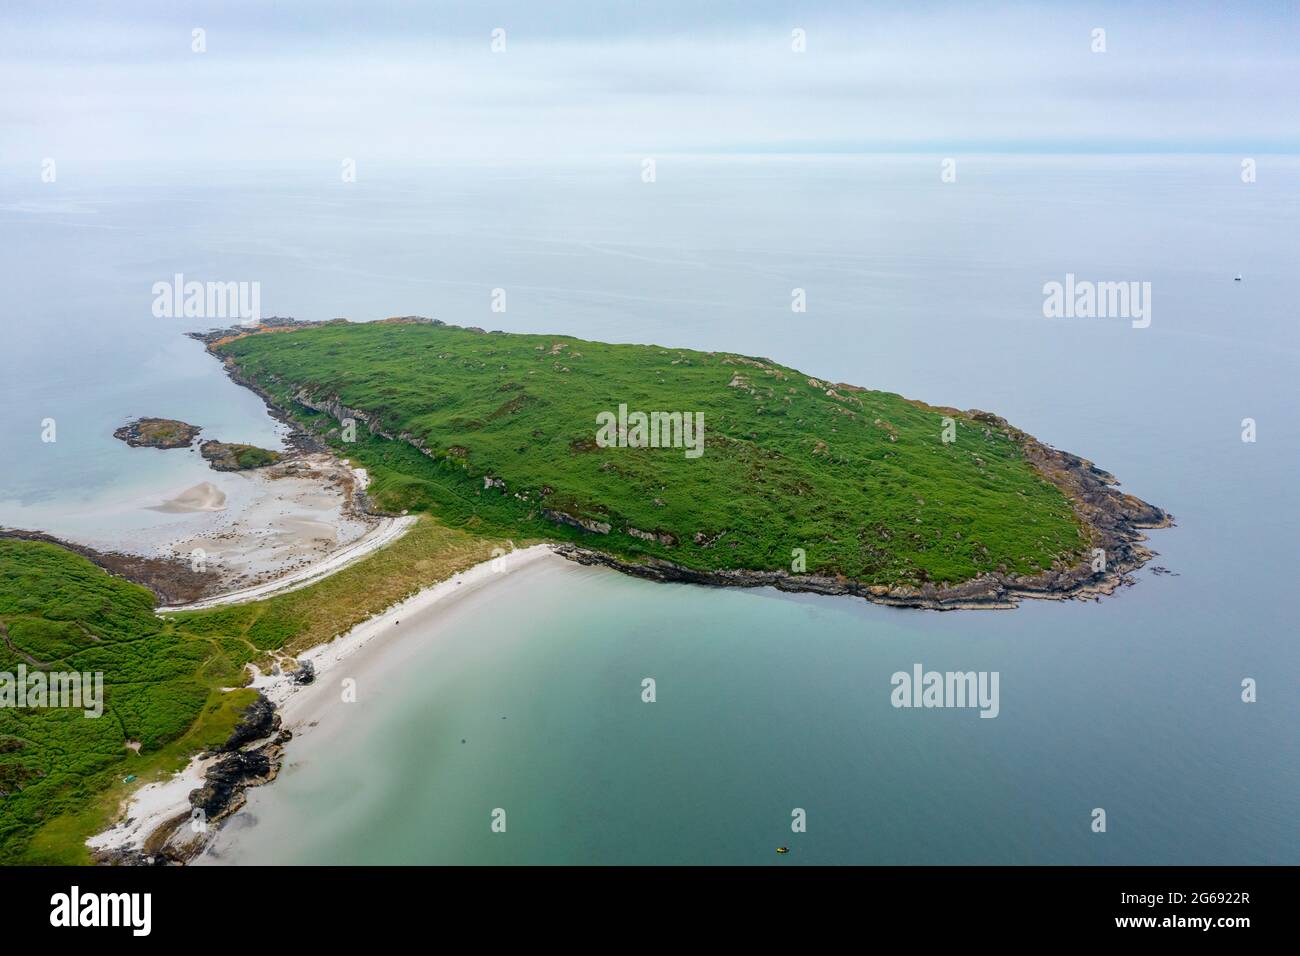 The Twin Beaches tombolo or sandy isthmus at An Doirlinn next to Eilean Garbh island at north end of  Isle of Gigha, Kintyre peninsula, Argyll & Bute, Stock Photo